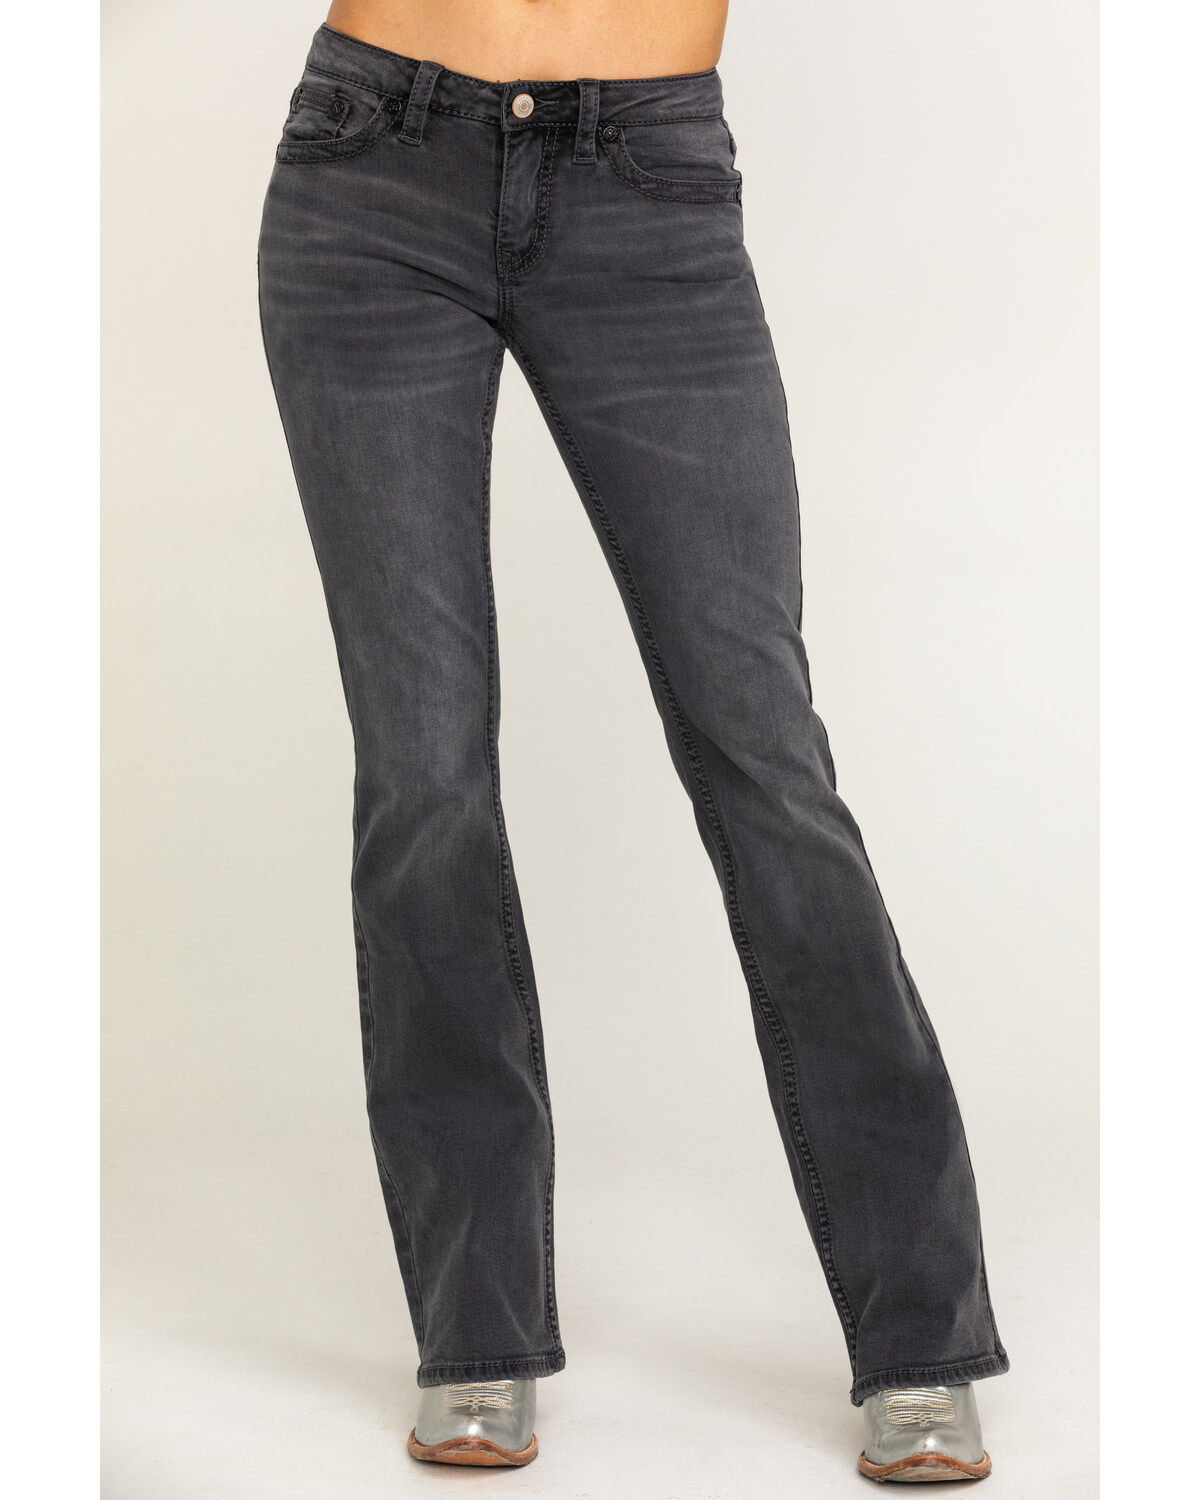 Grey Feather Bootcut Jeans | Boot Barn